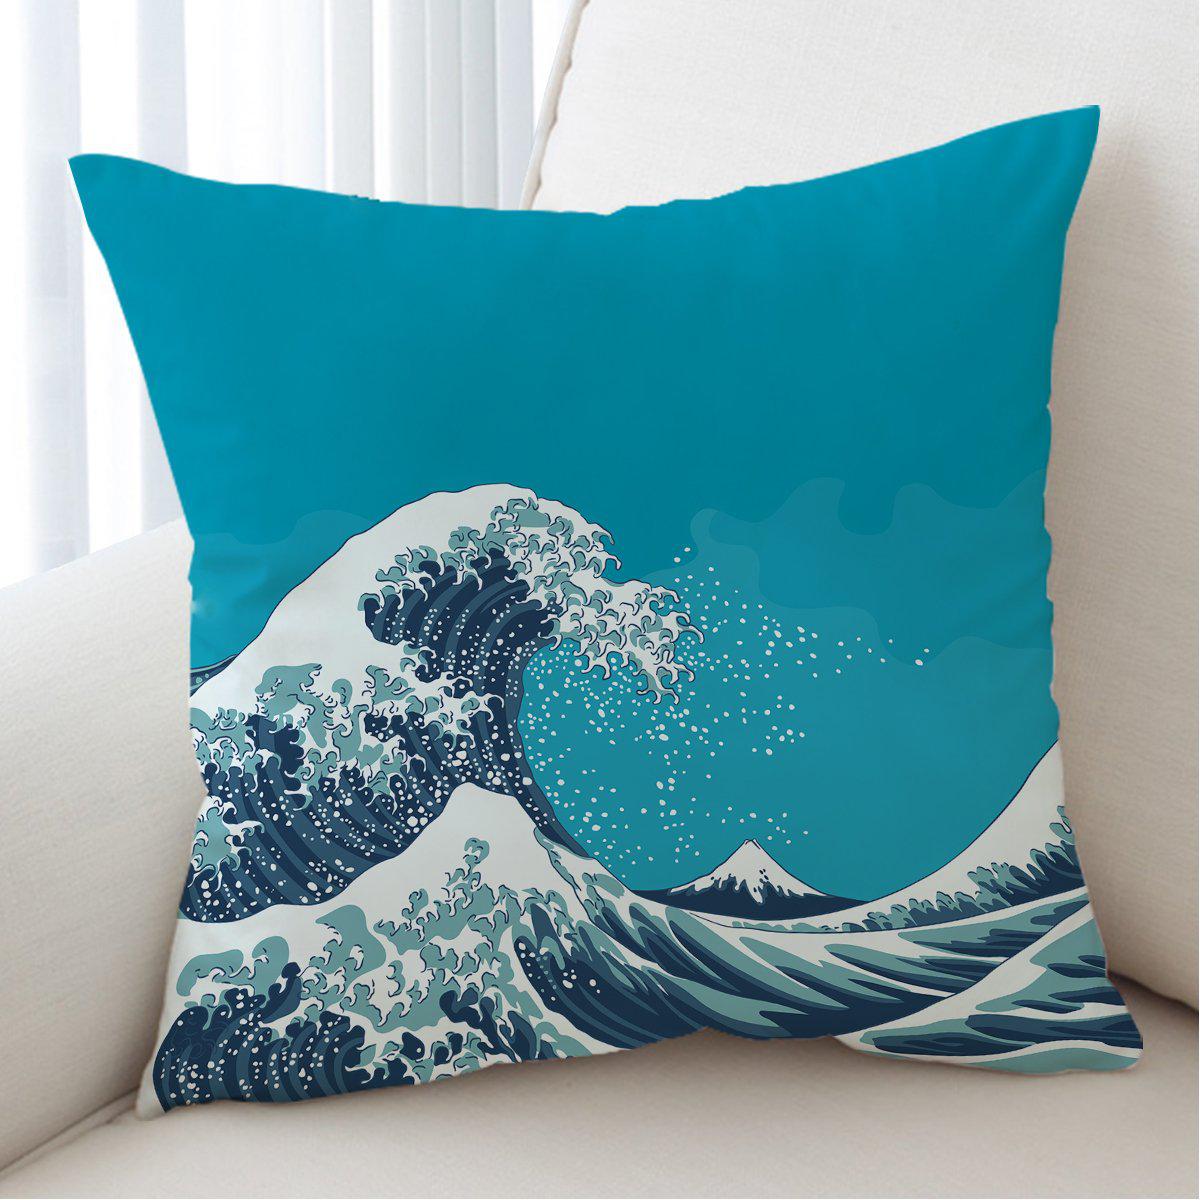 The Great Wave Pillow Cover